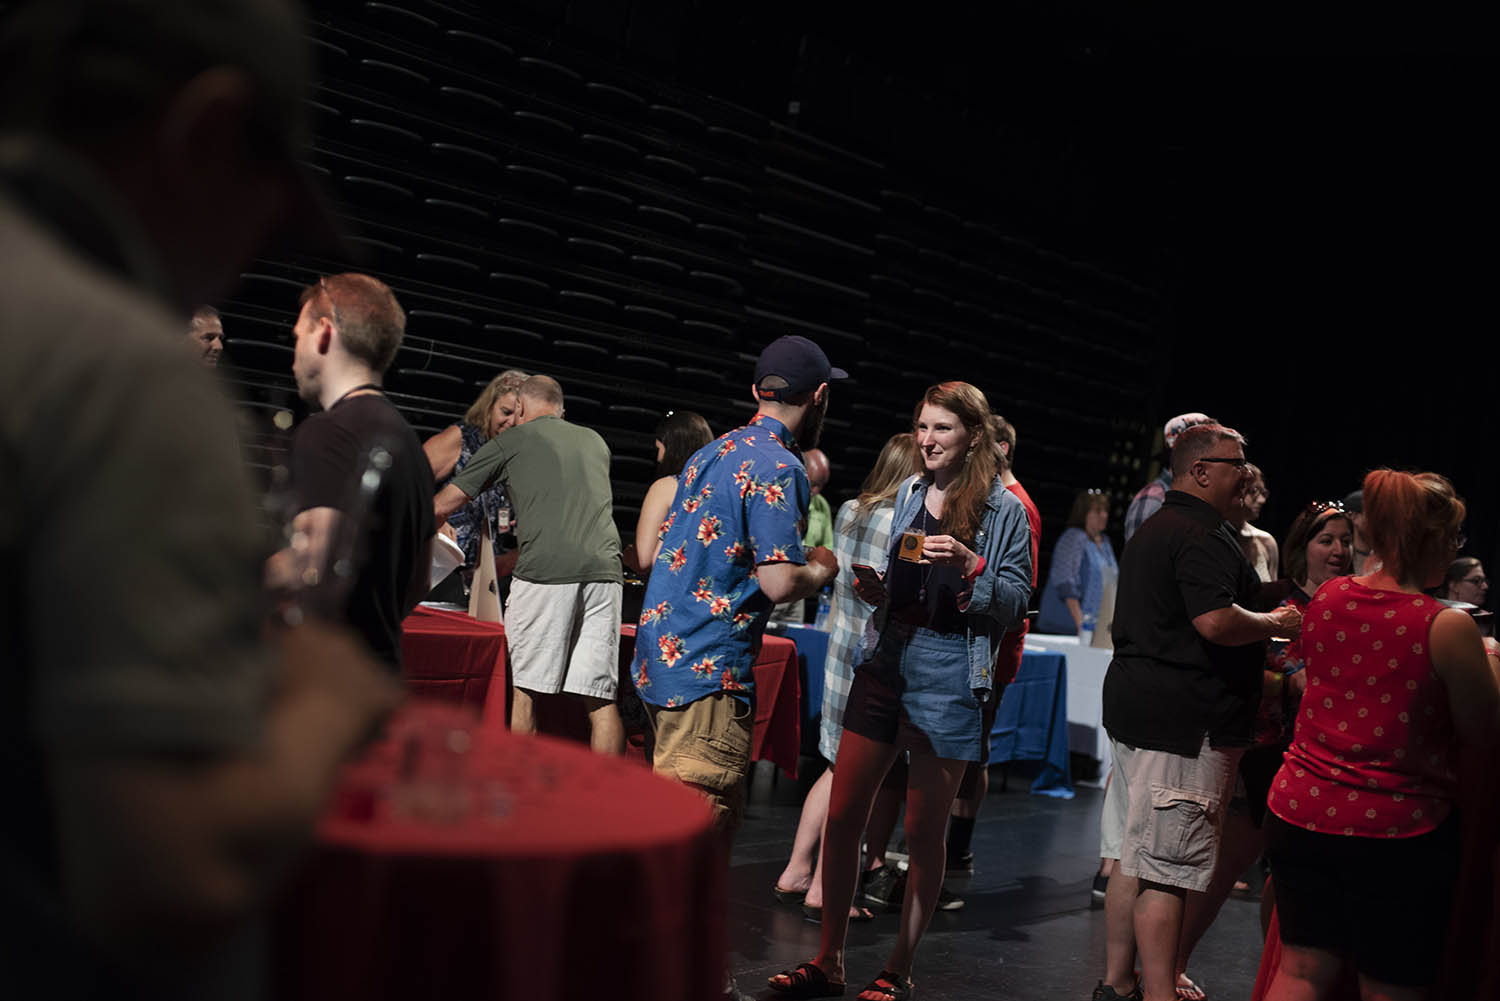 Patrons sample beer and cider during Red, White & Brew at Proctors Friday, June 30, 2018.